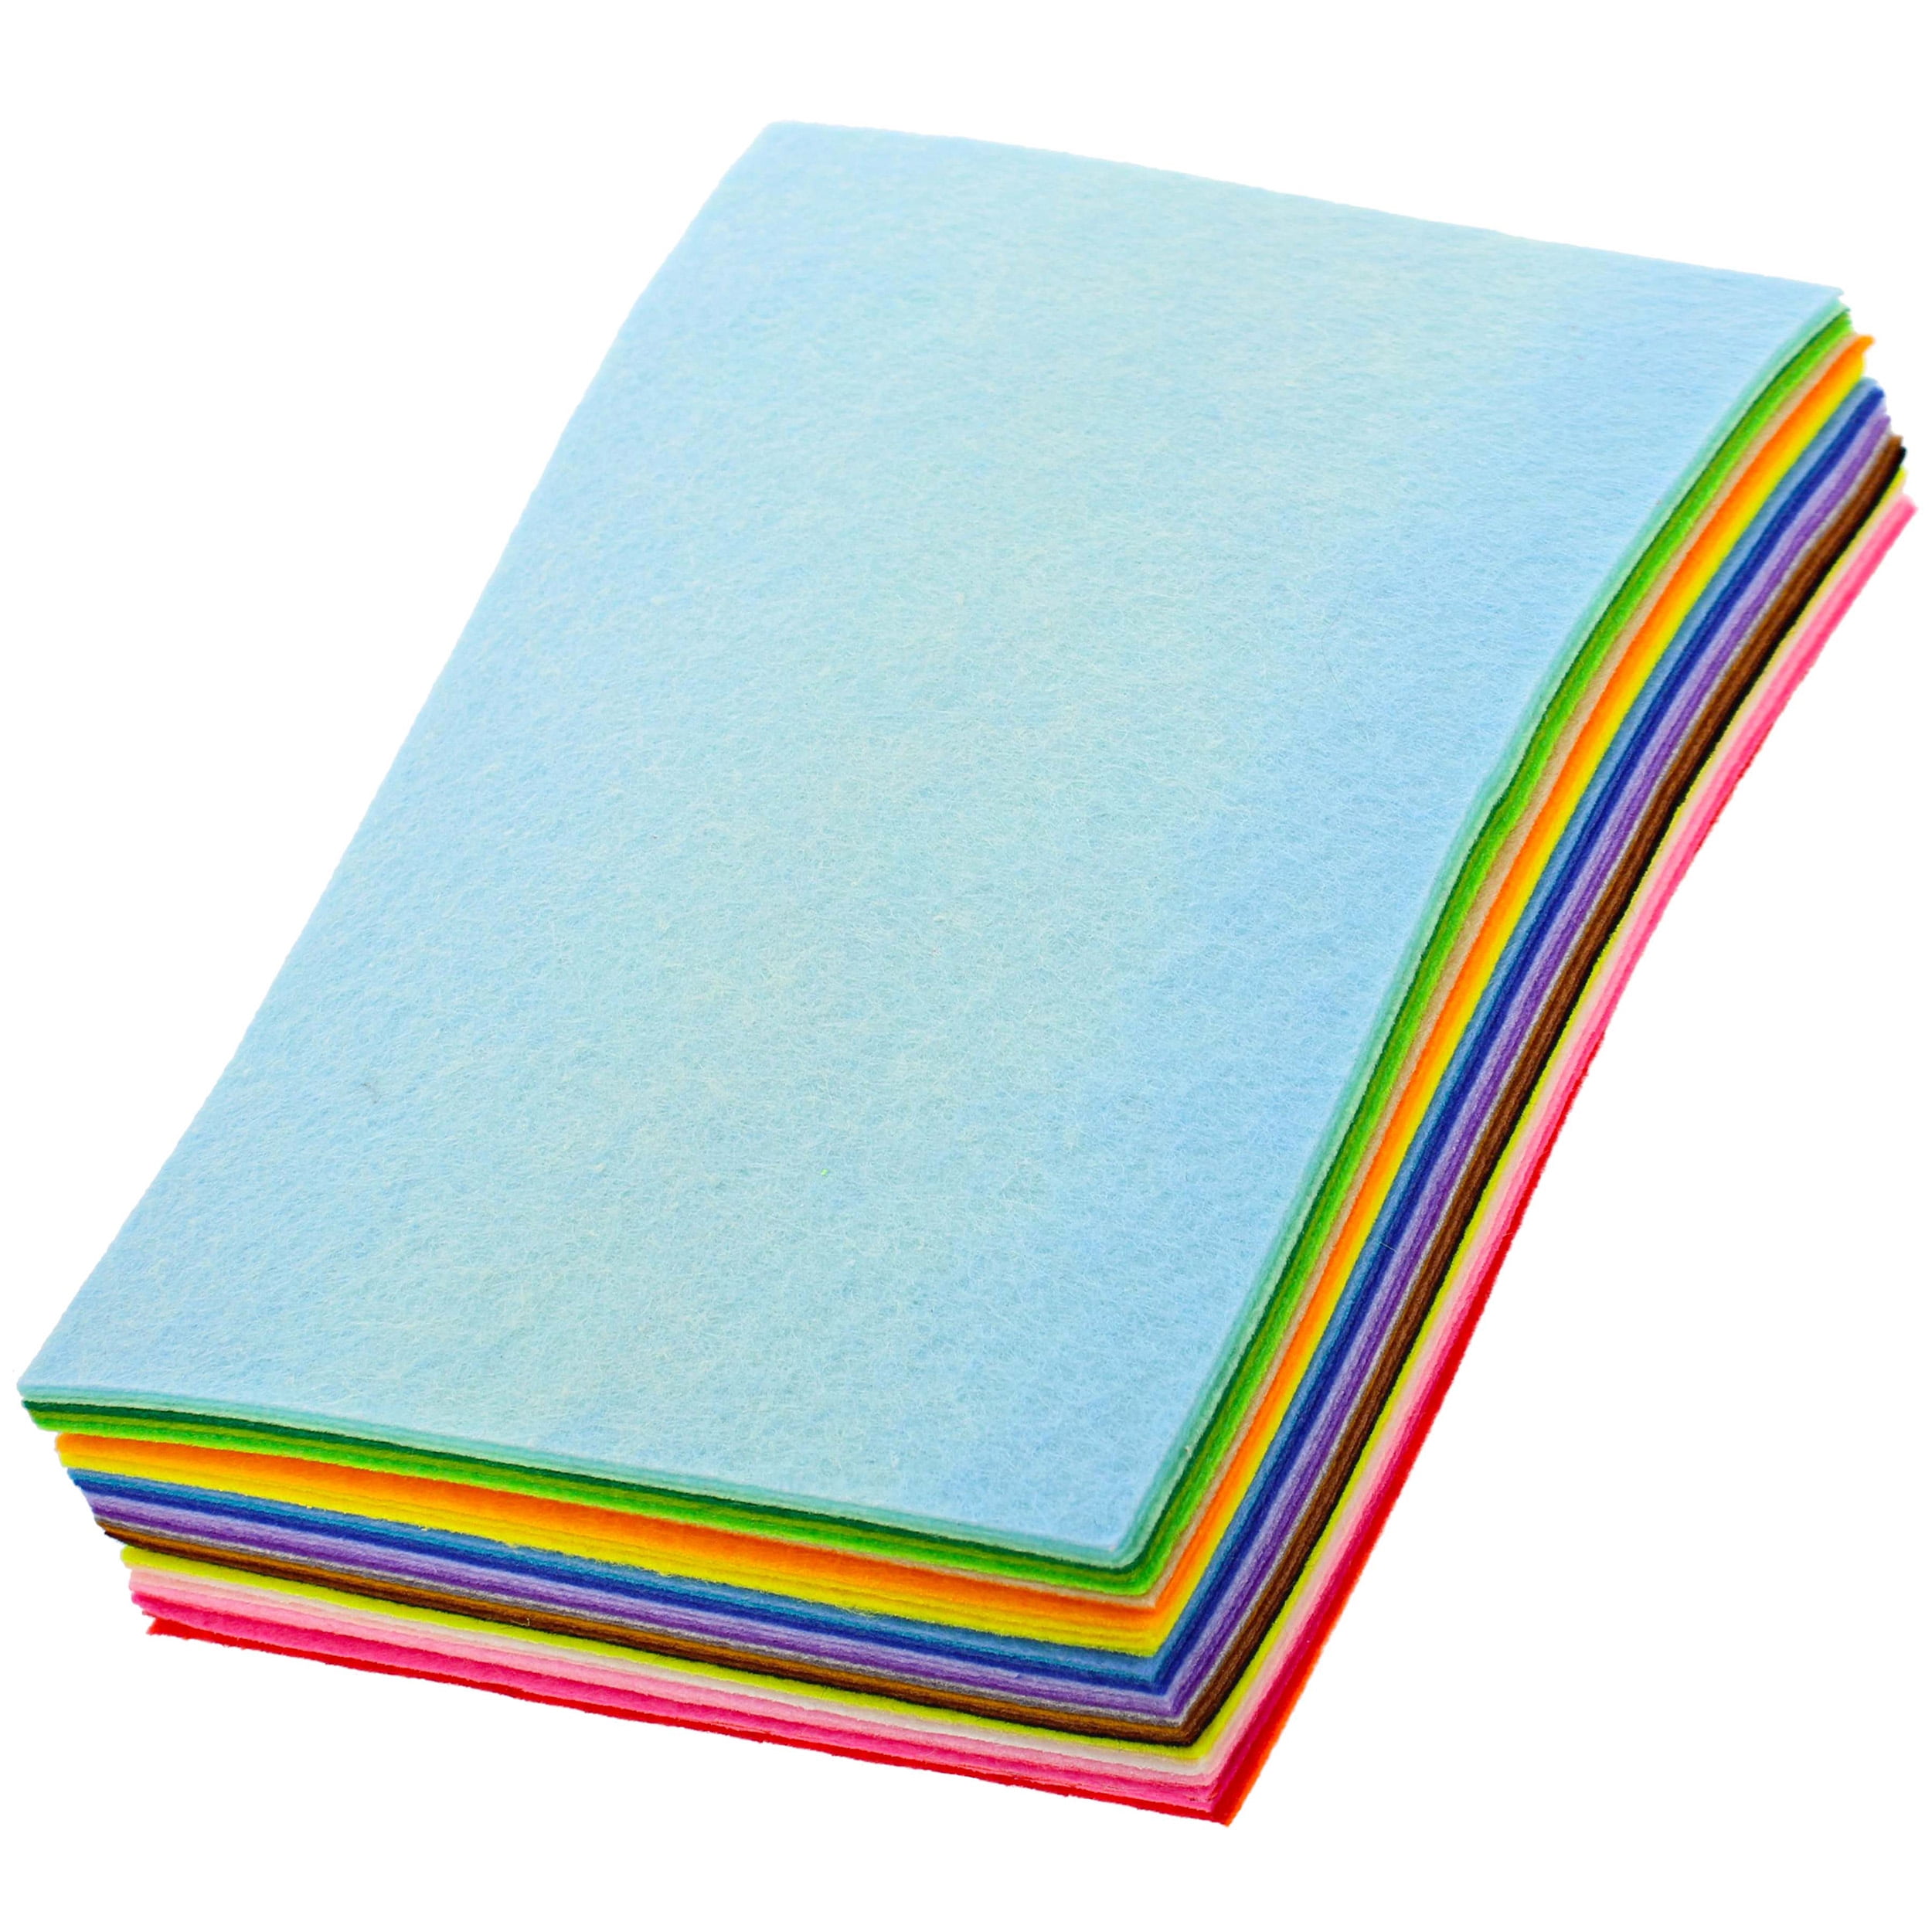 Apehuyuan Colored Felt Fabric Sheets 8*12 inches 40 Pcs 1mm Thick Pre Cut  Quilt Squares Assorted Patchwork Sewing DIY Craft for Kids School